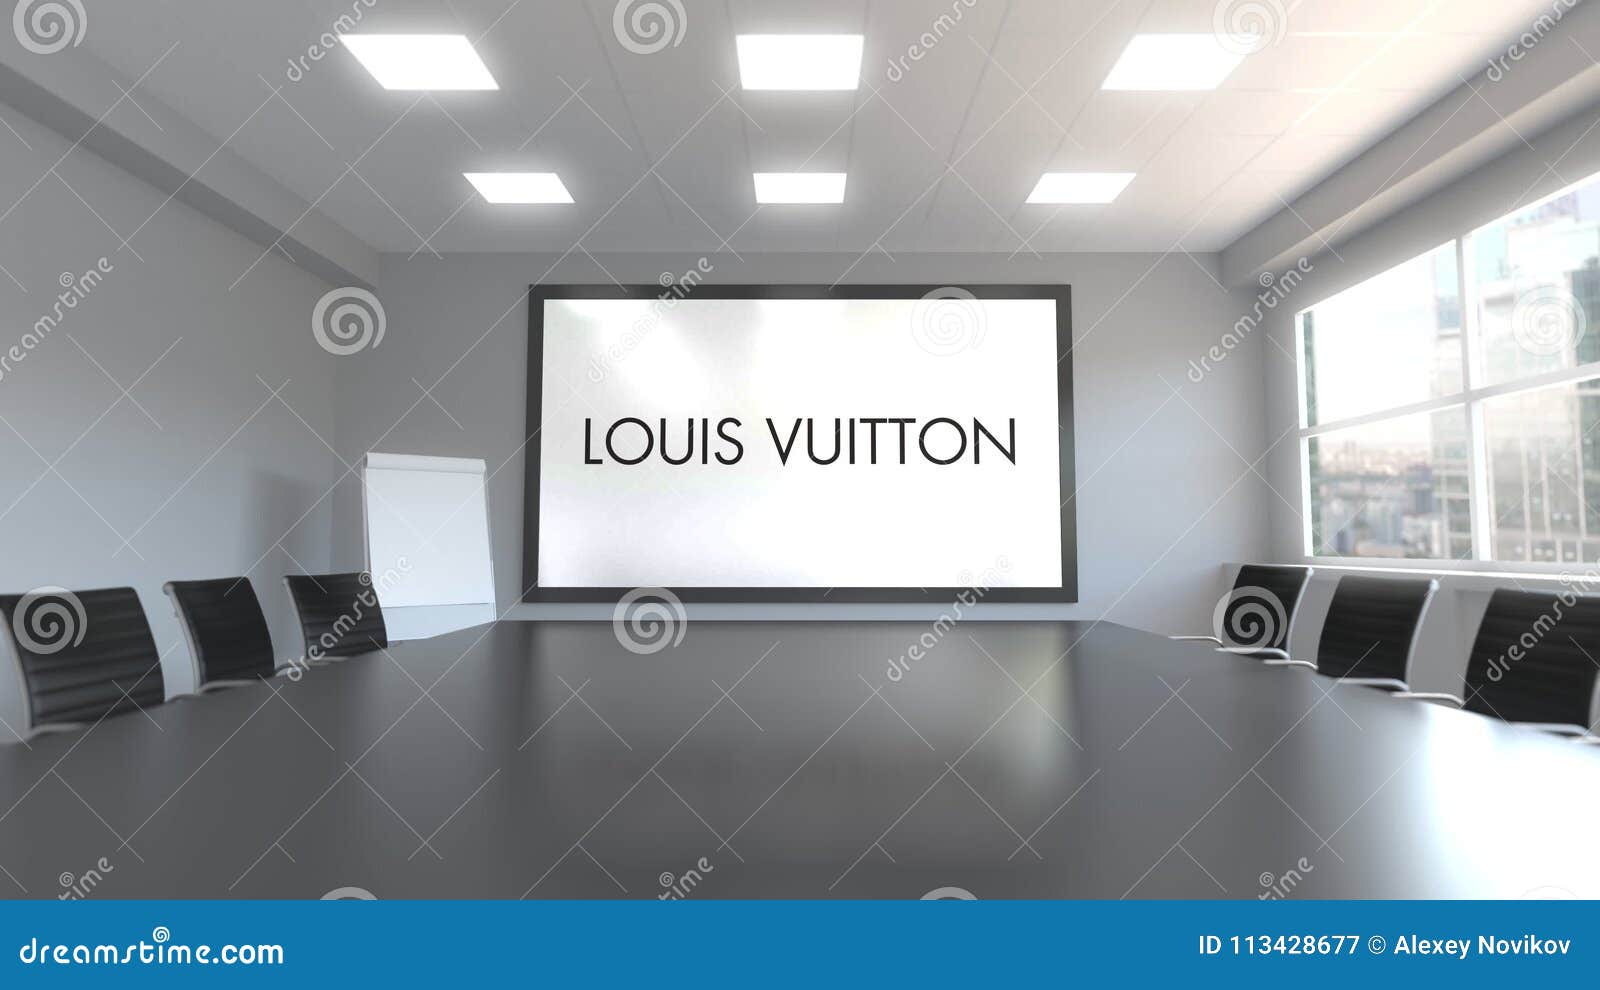 Louis Vuitton Logo on the Screen in a Meeting Room. Editorial 3D